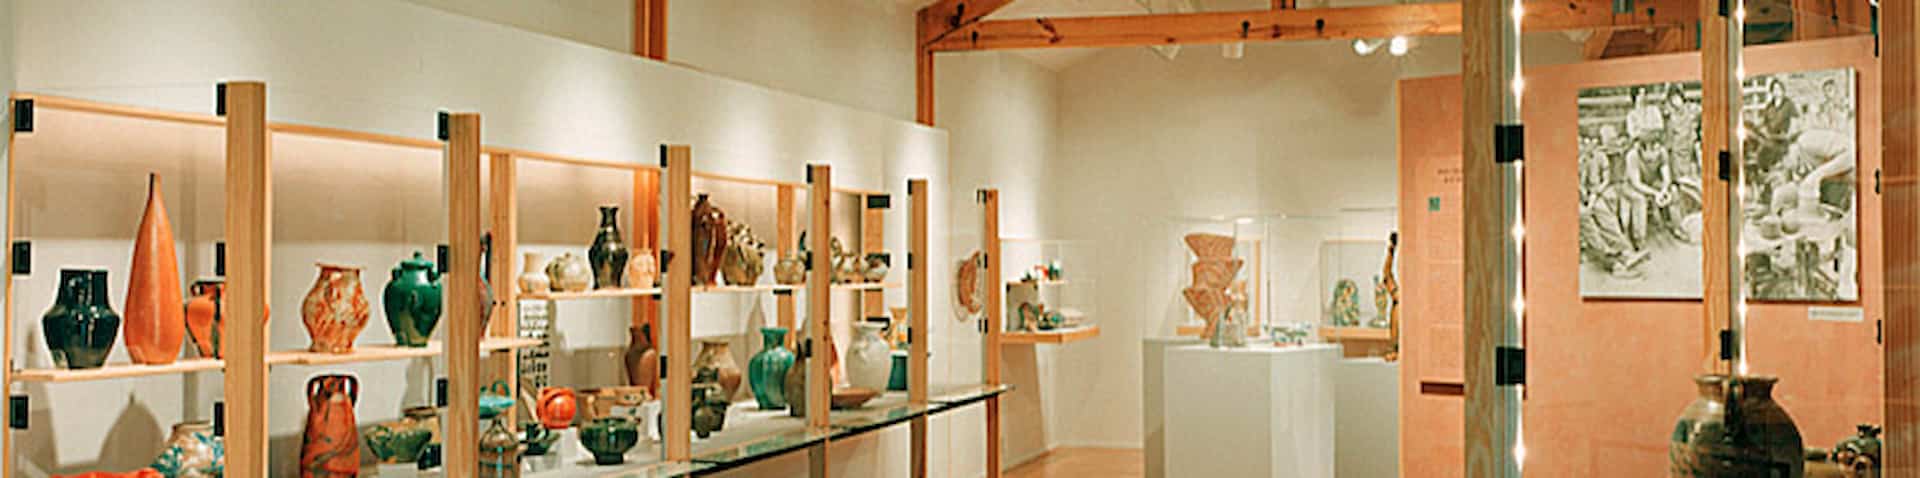 a view of inside of pottery center with pottery displayed